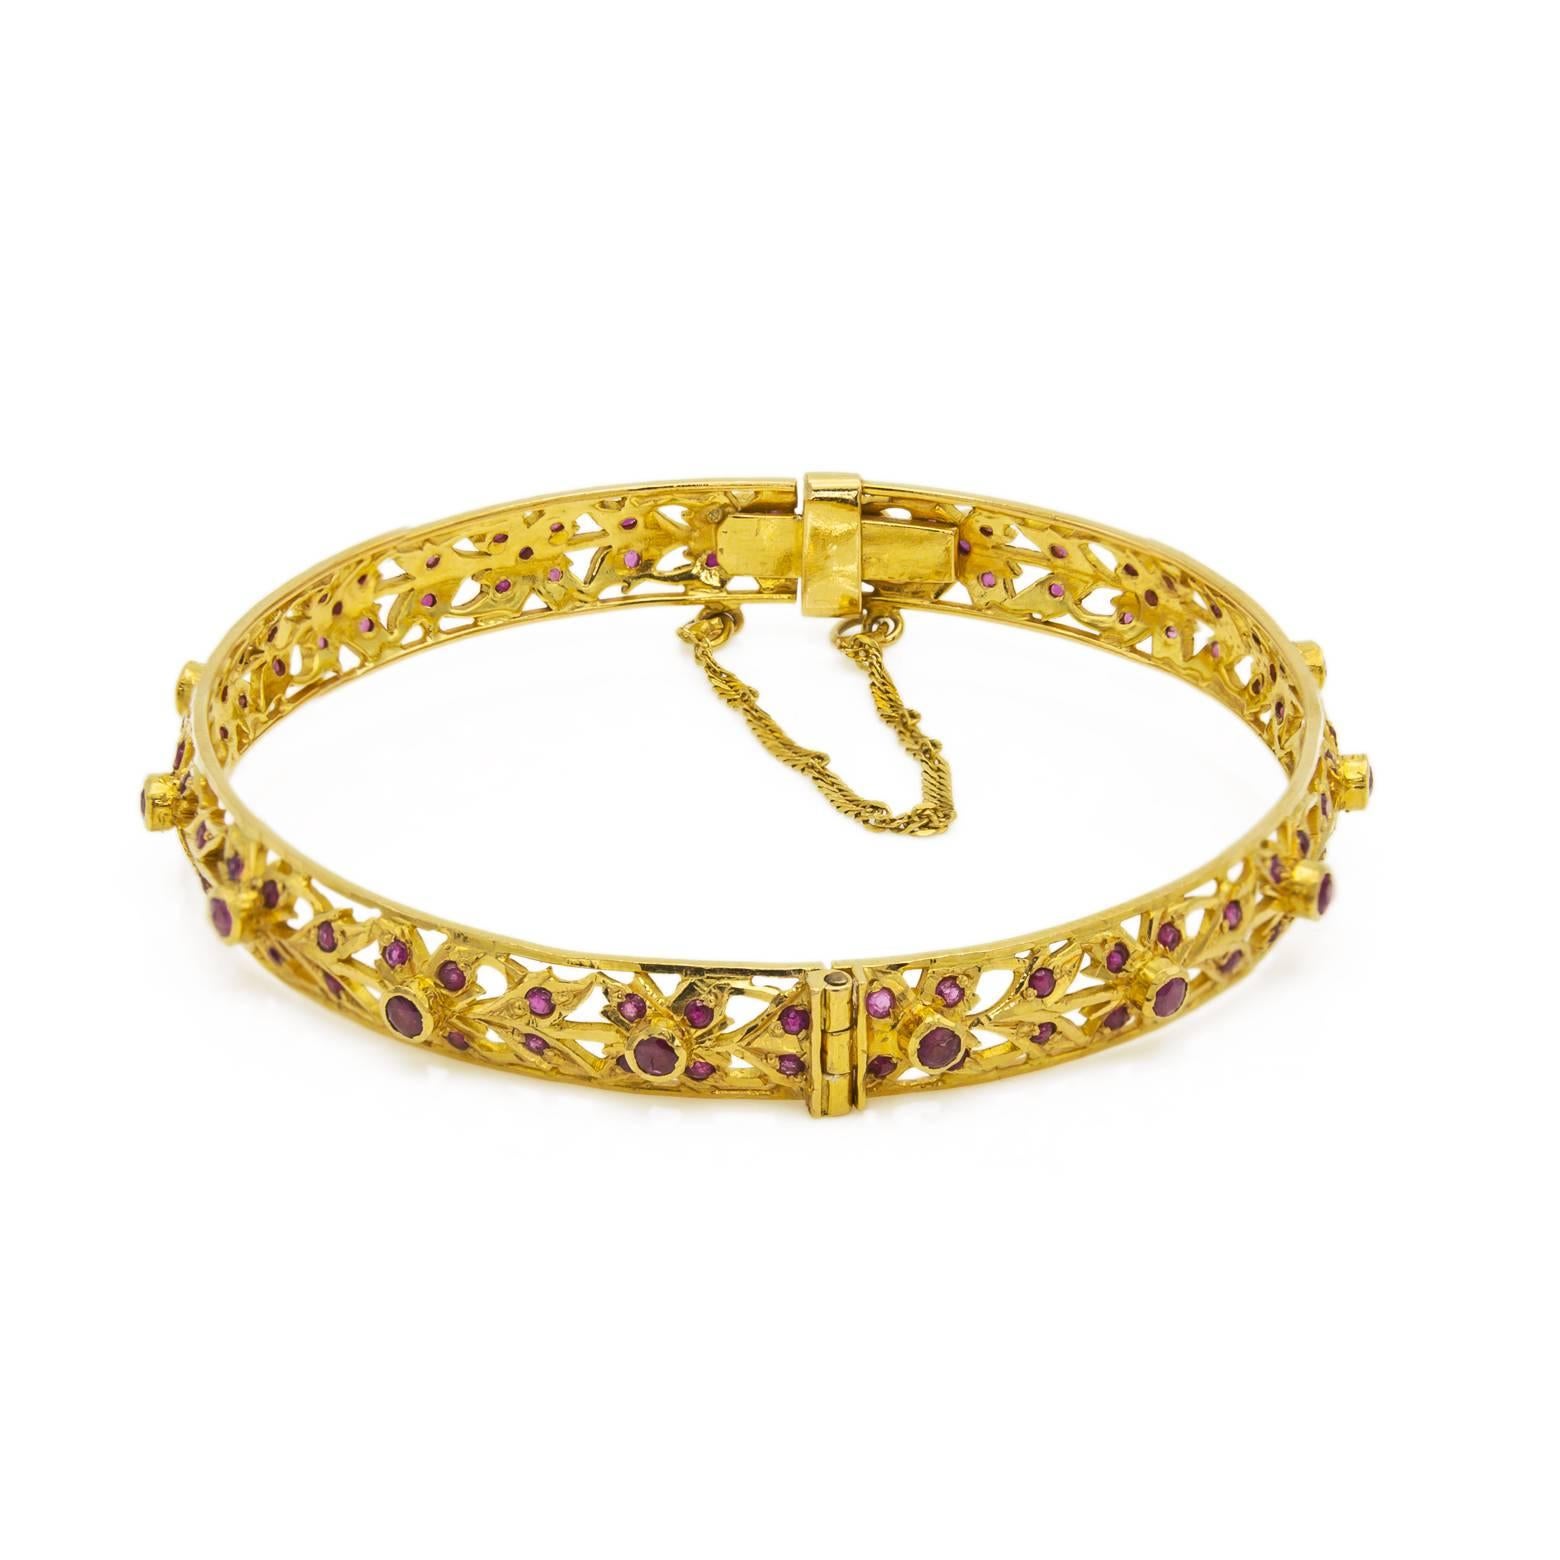 This bracelet is so delicately detailed it almost looks like-lace with a glowing 22K yellow gold sheen and excellent craftsmanship. The bright rubies in a floral design stand out and sing while the strength and authenticity of this piece was built